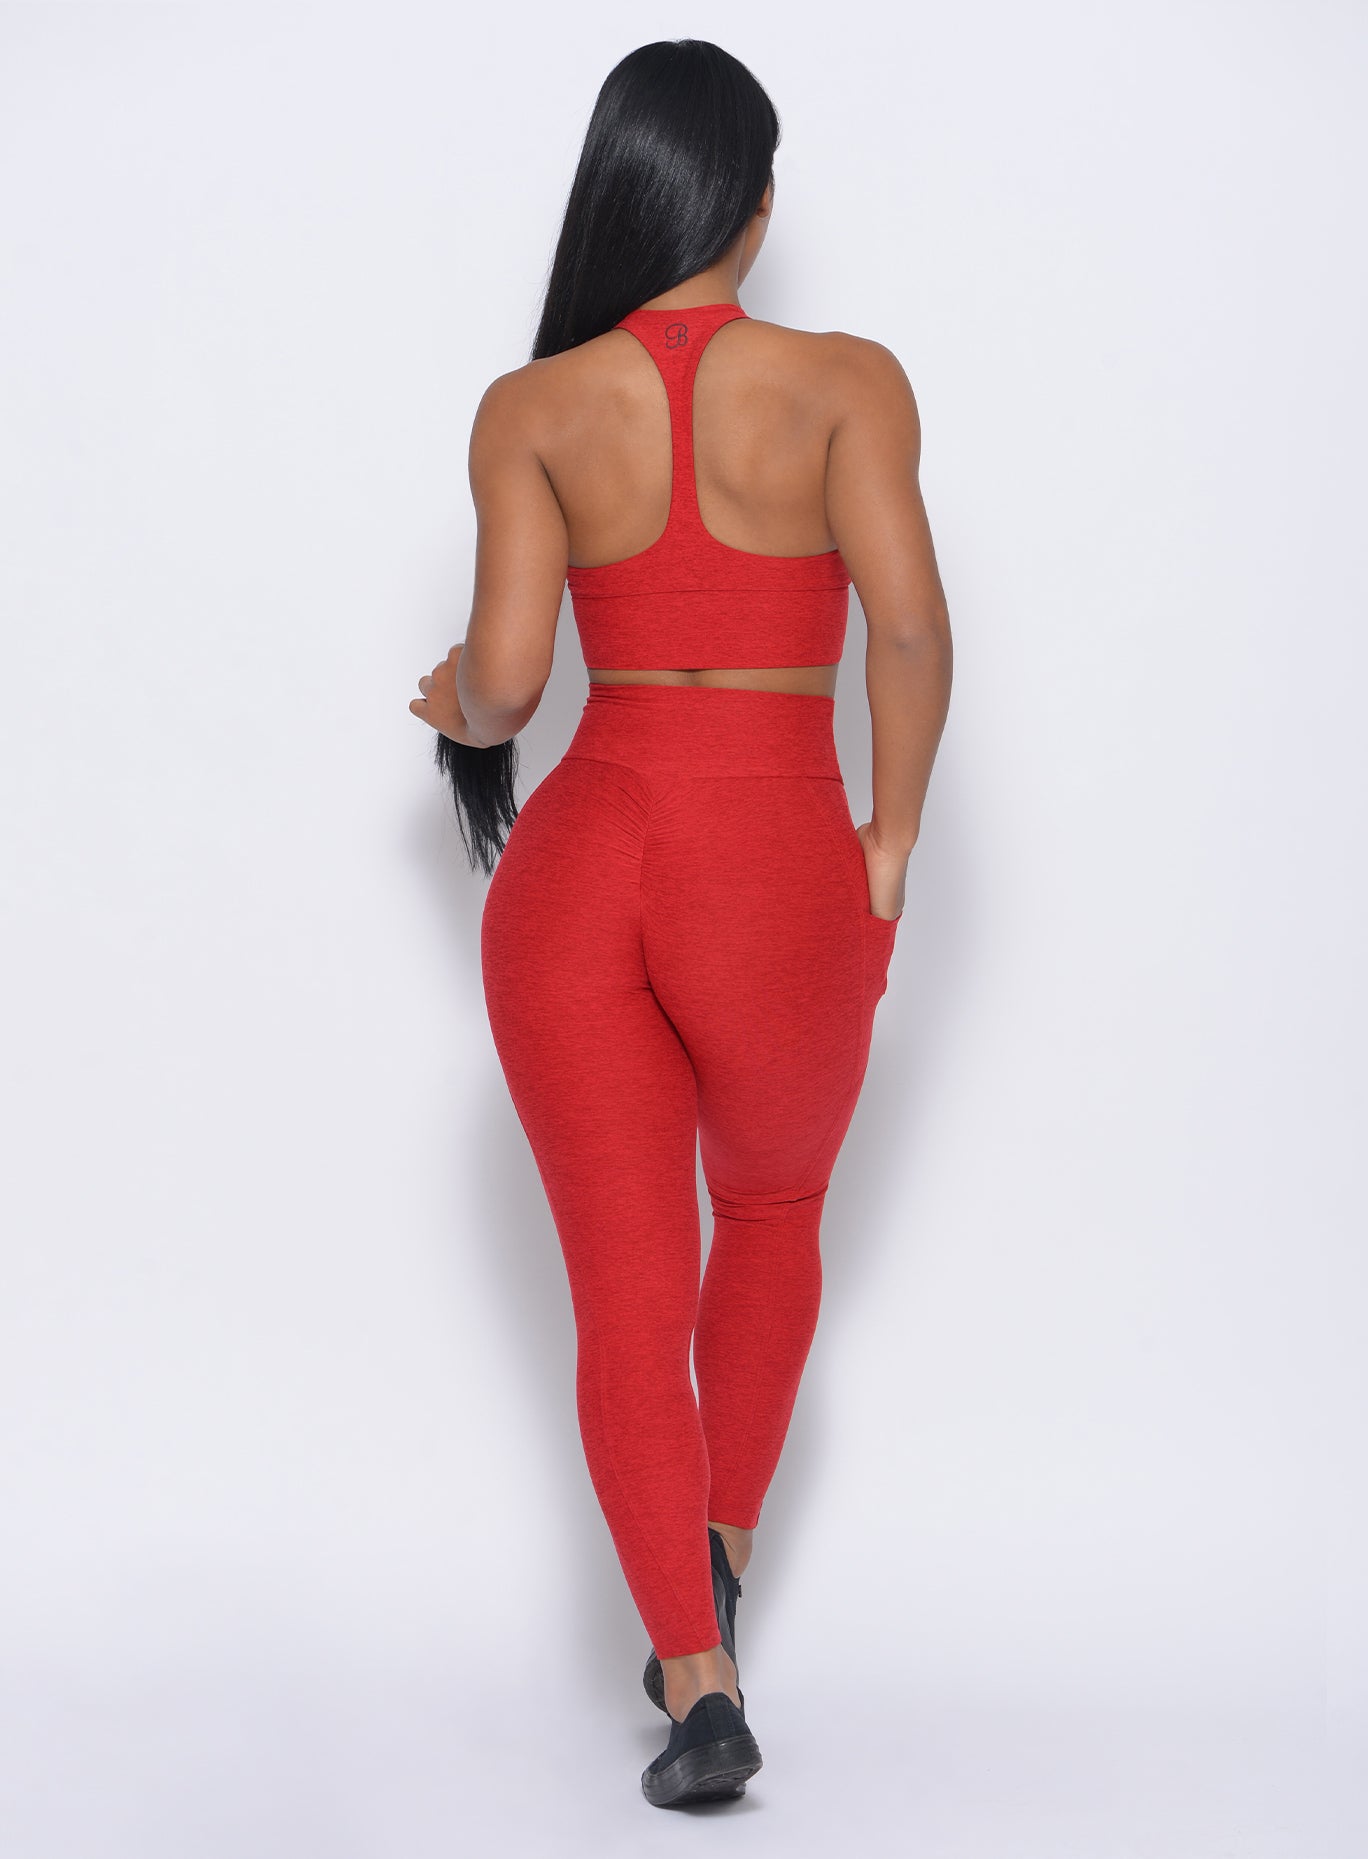 Back profile view of the model wearing our thrive leggings in sunset red color and a matching bra